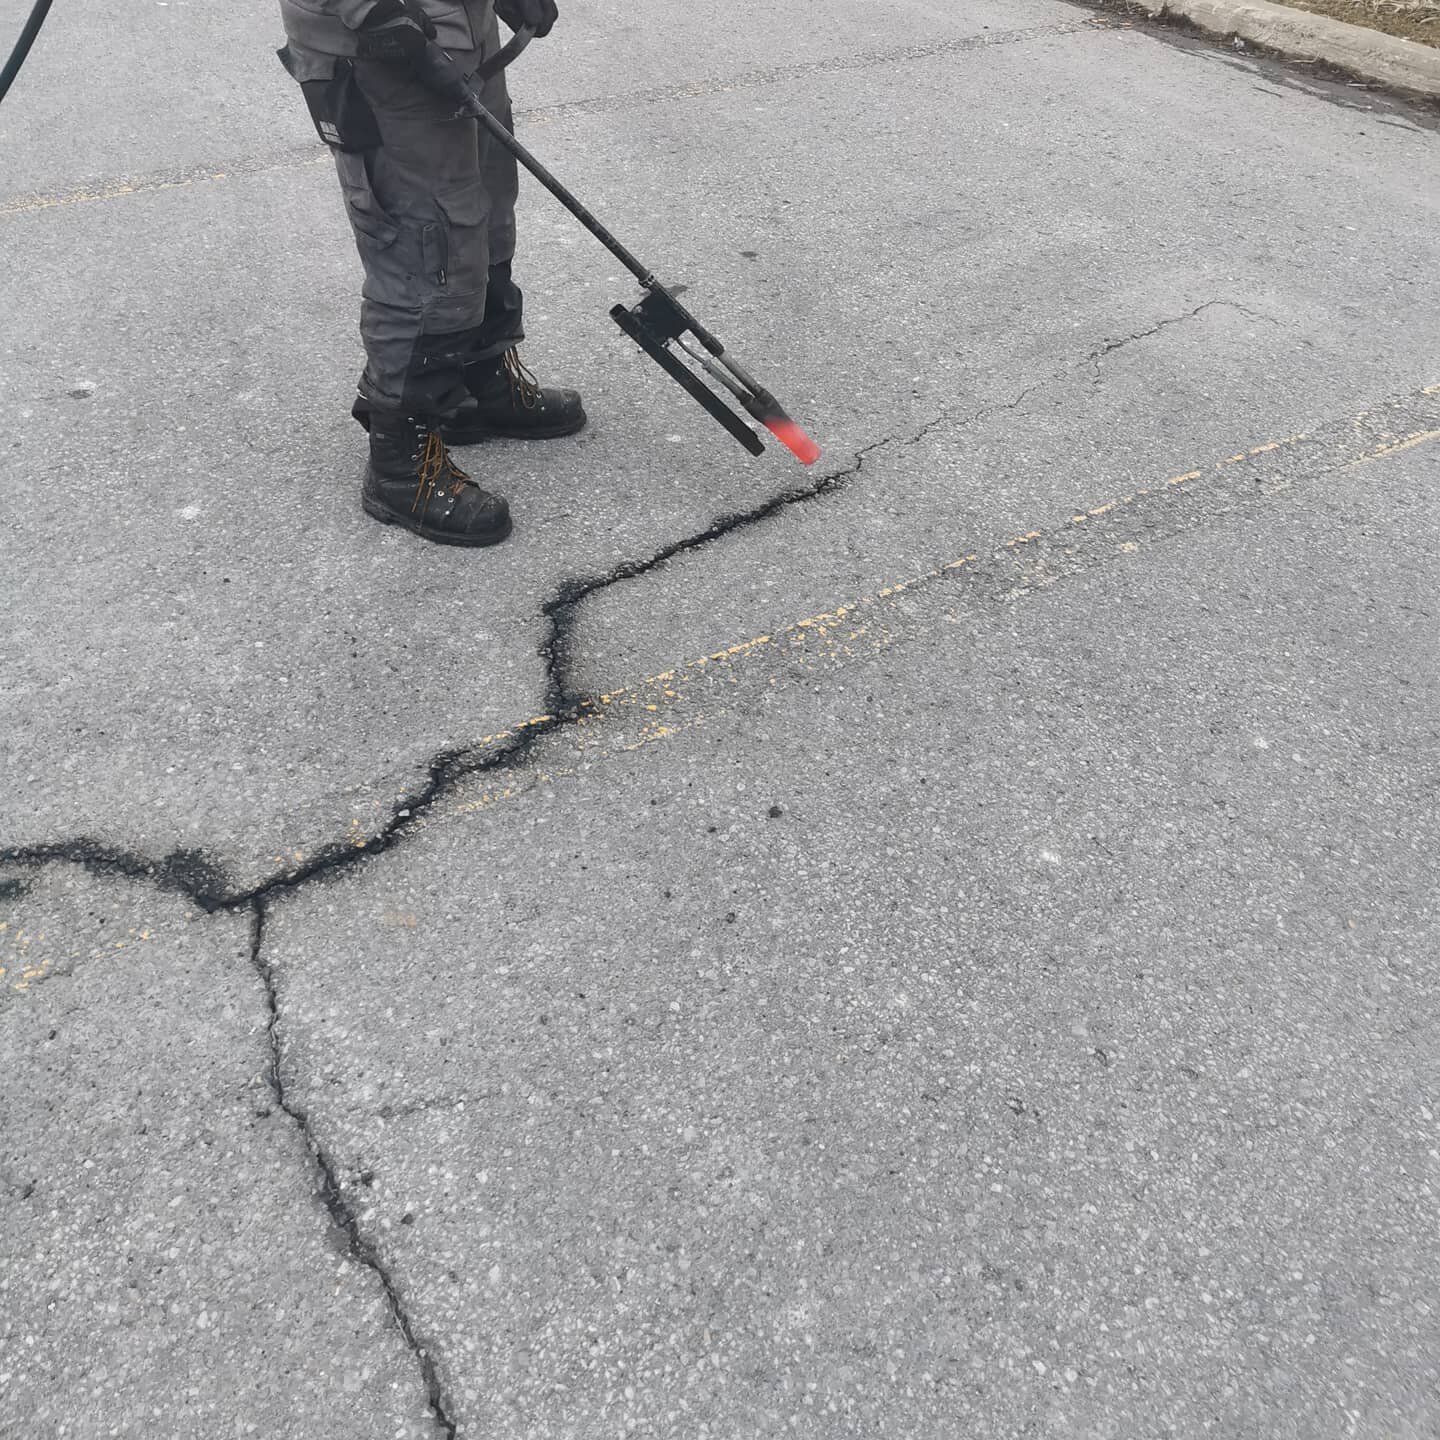 Early start, out killing those cracks with the lance @walmartcanada -5 we got this.